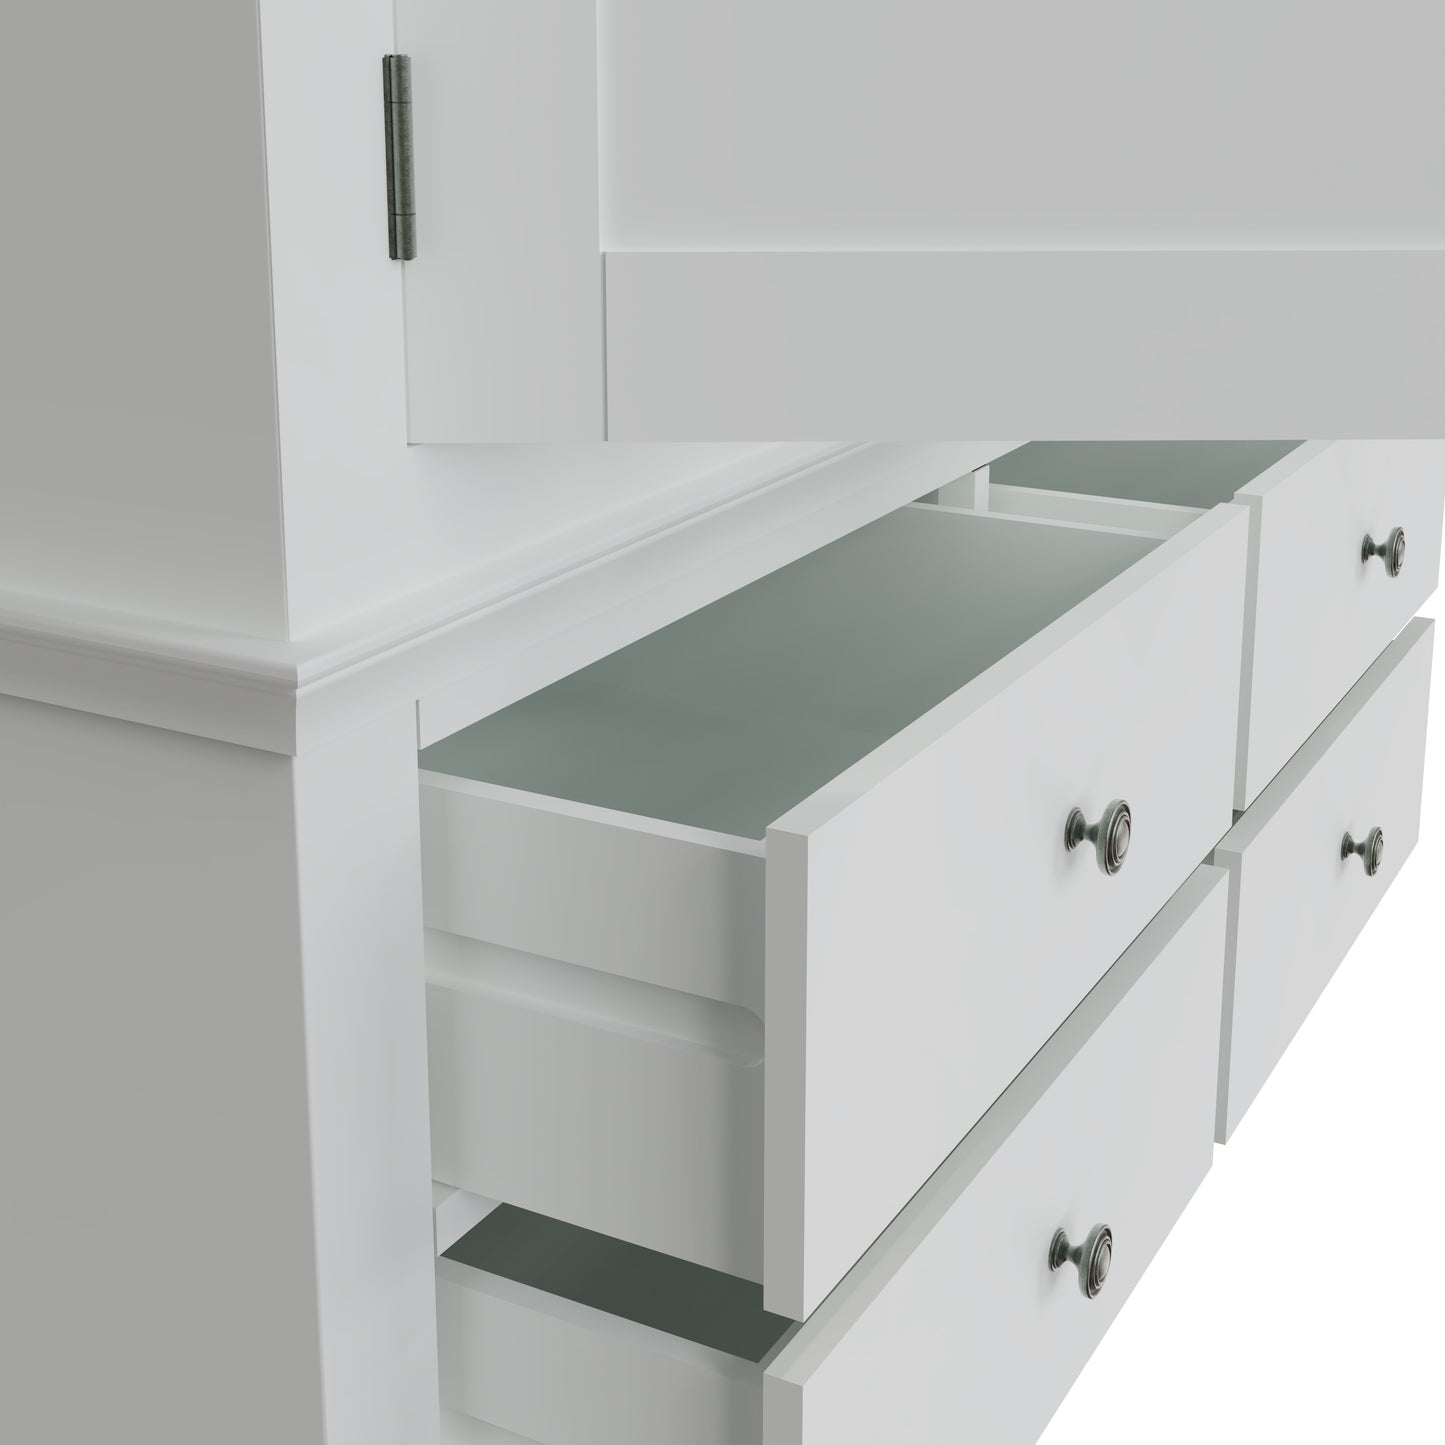 Toulouse White Wardrobe - 2 Door With Drawers